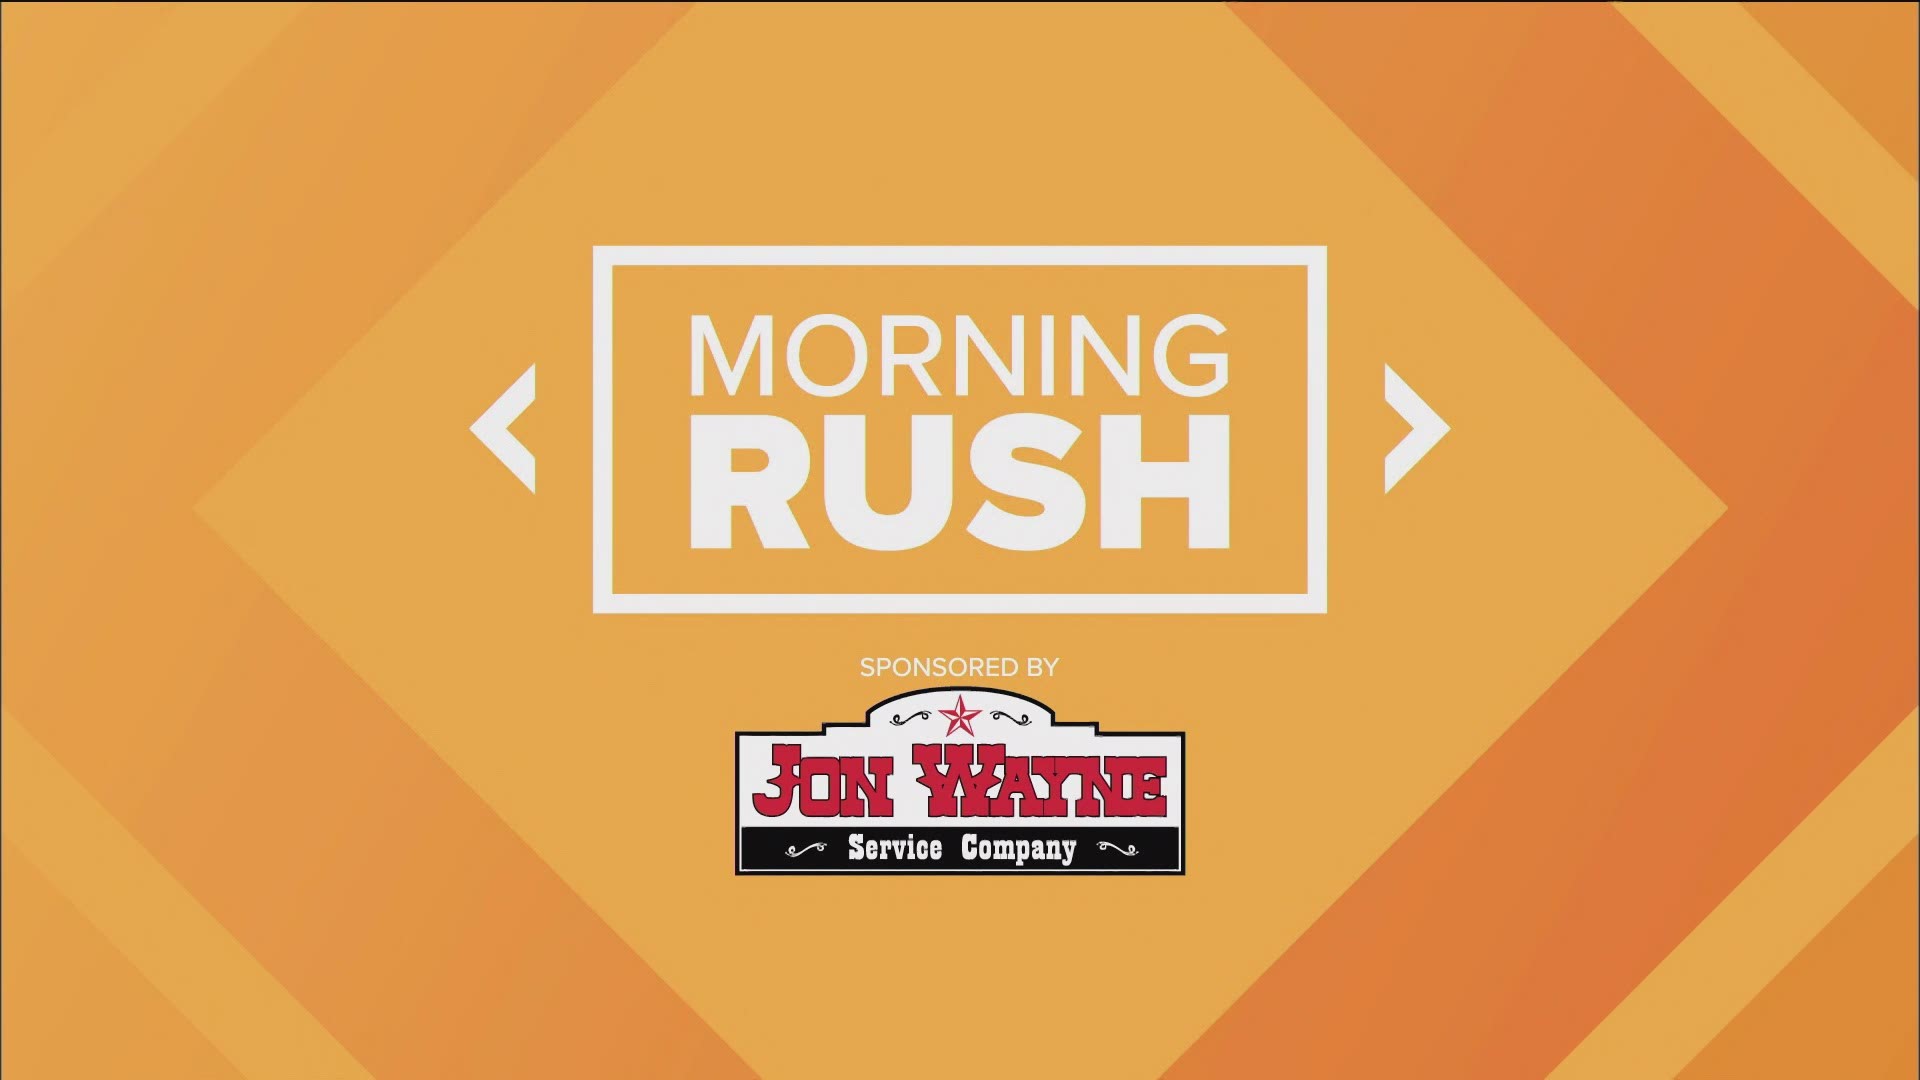 In today's Morning Rush, we're sharing everything you need to know before heading out the door.